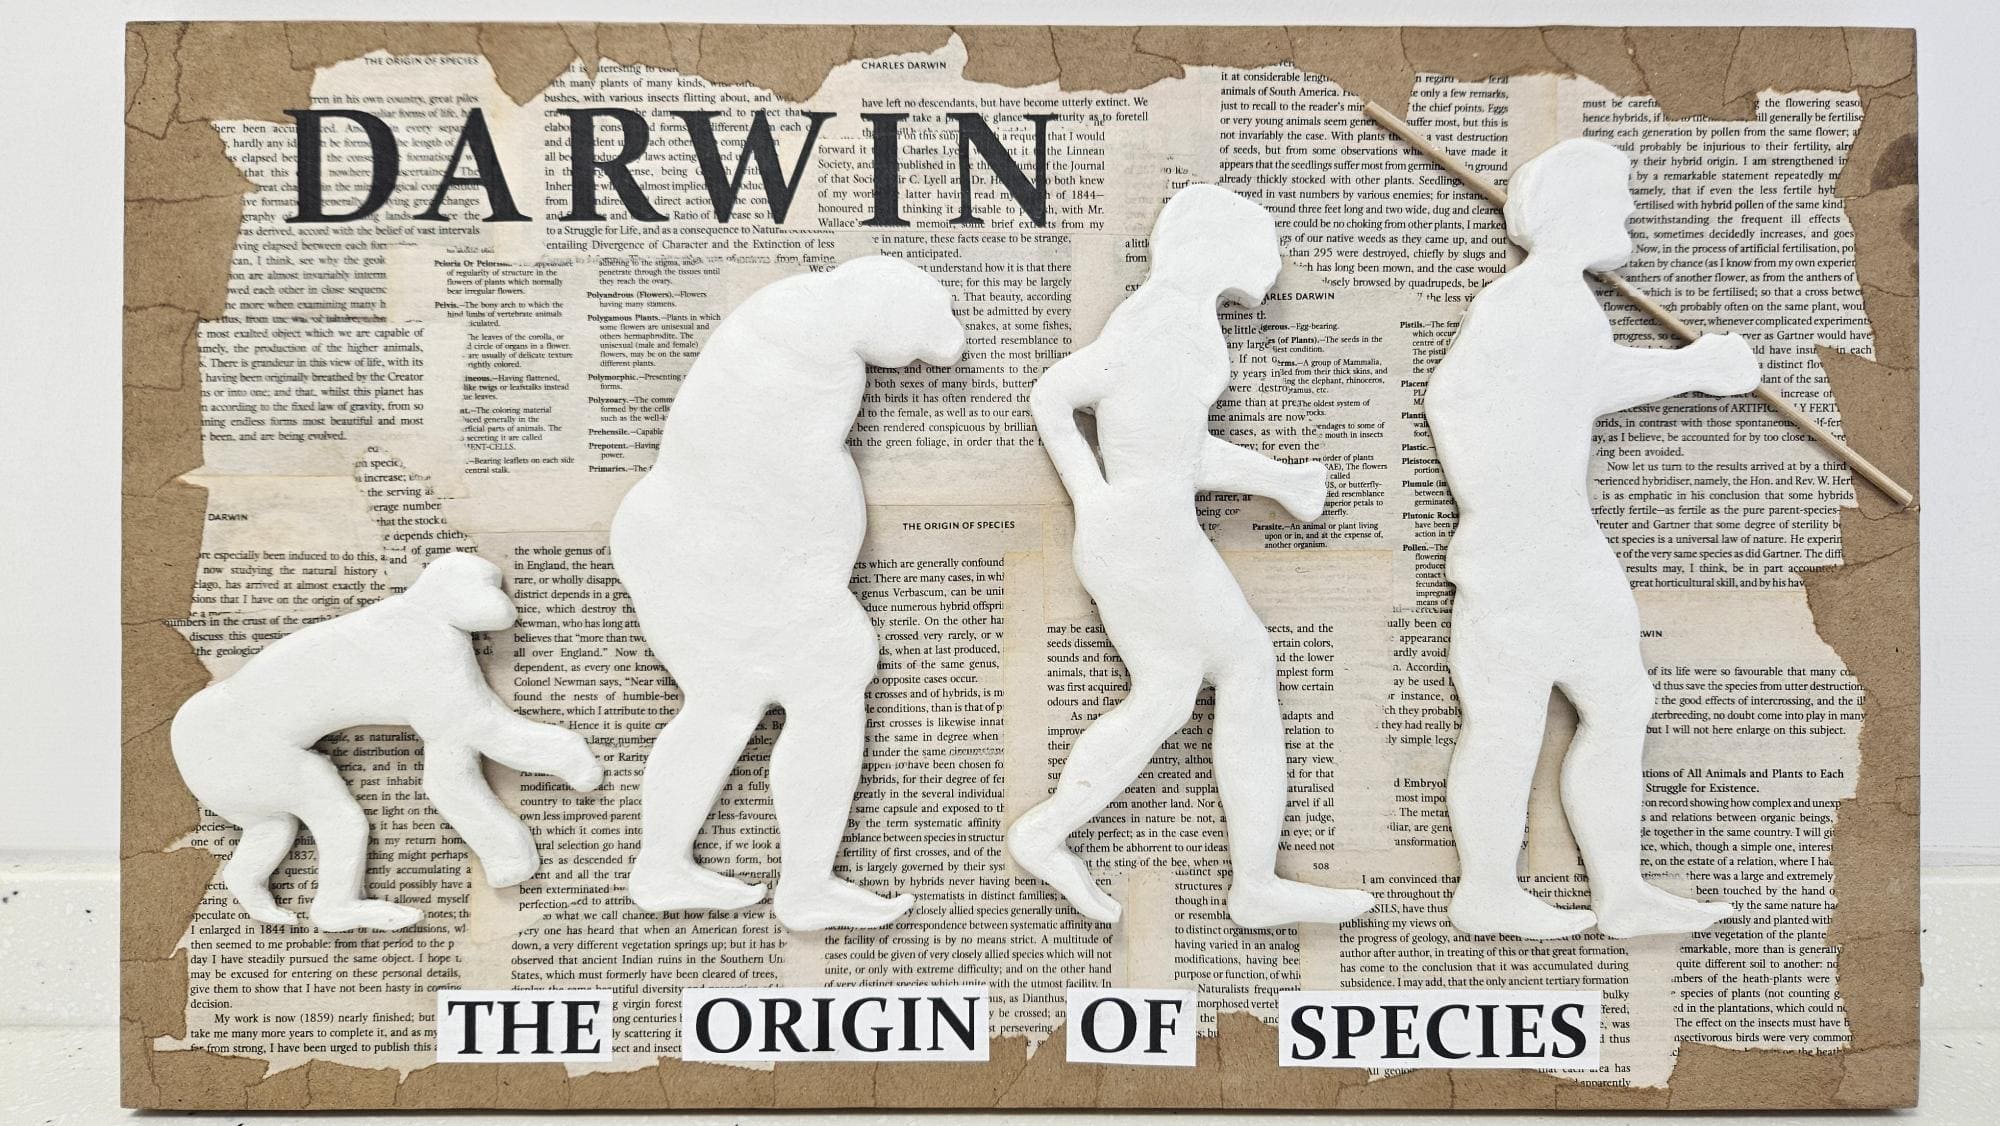 A piece of artwork based on Charles Darwin made for a science project